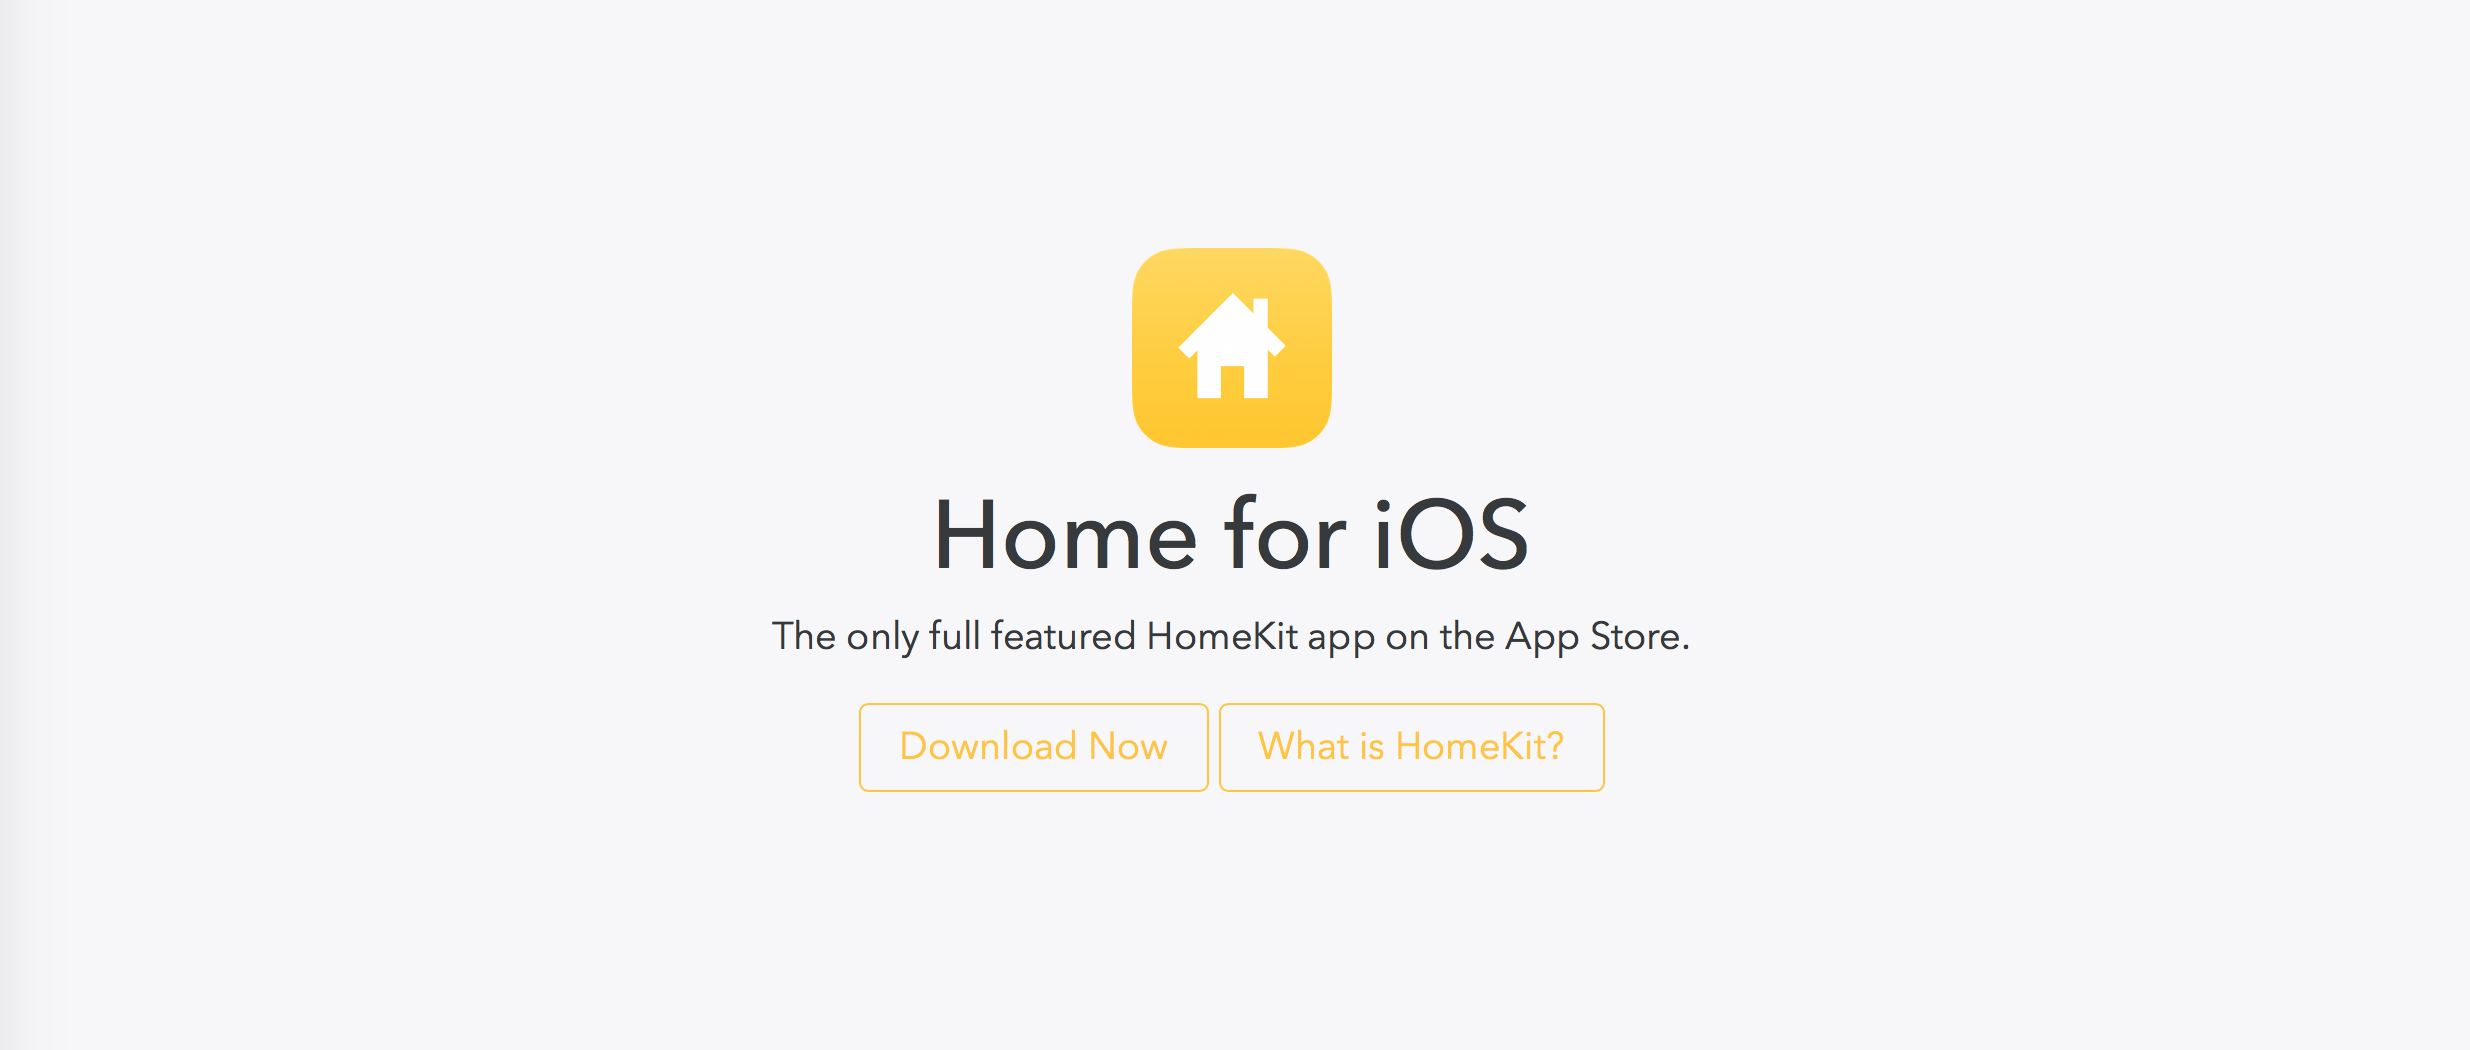 Control all your HomeKit devices with Home for Apple Watch